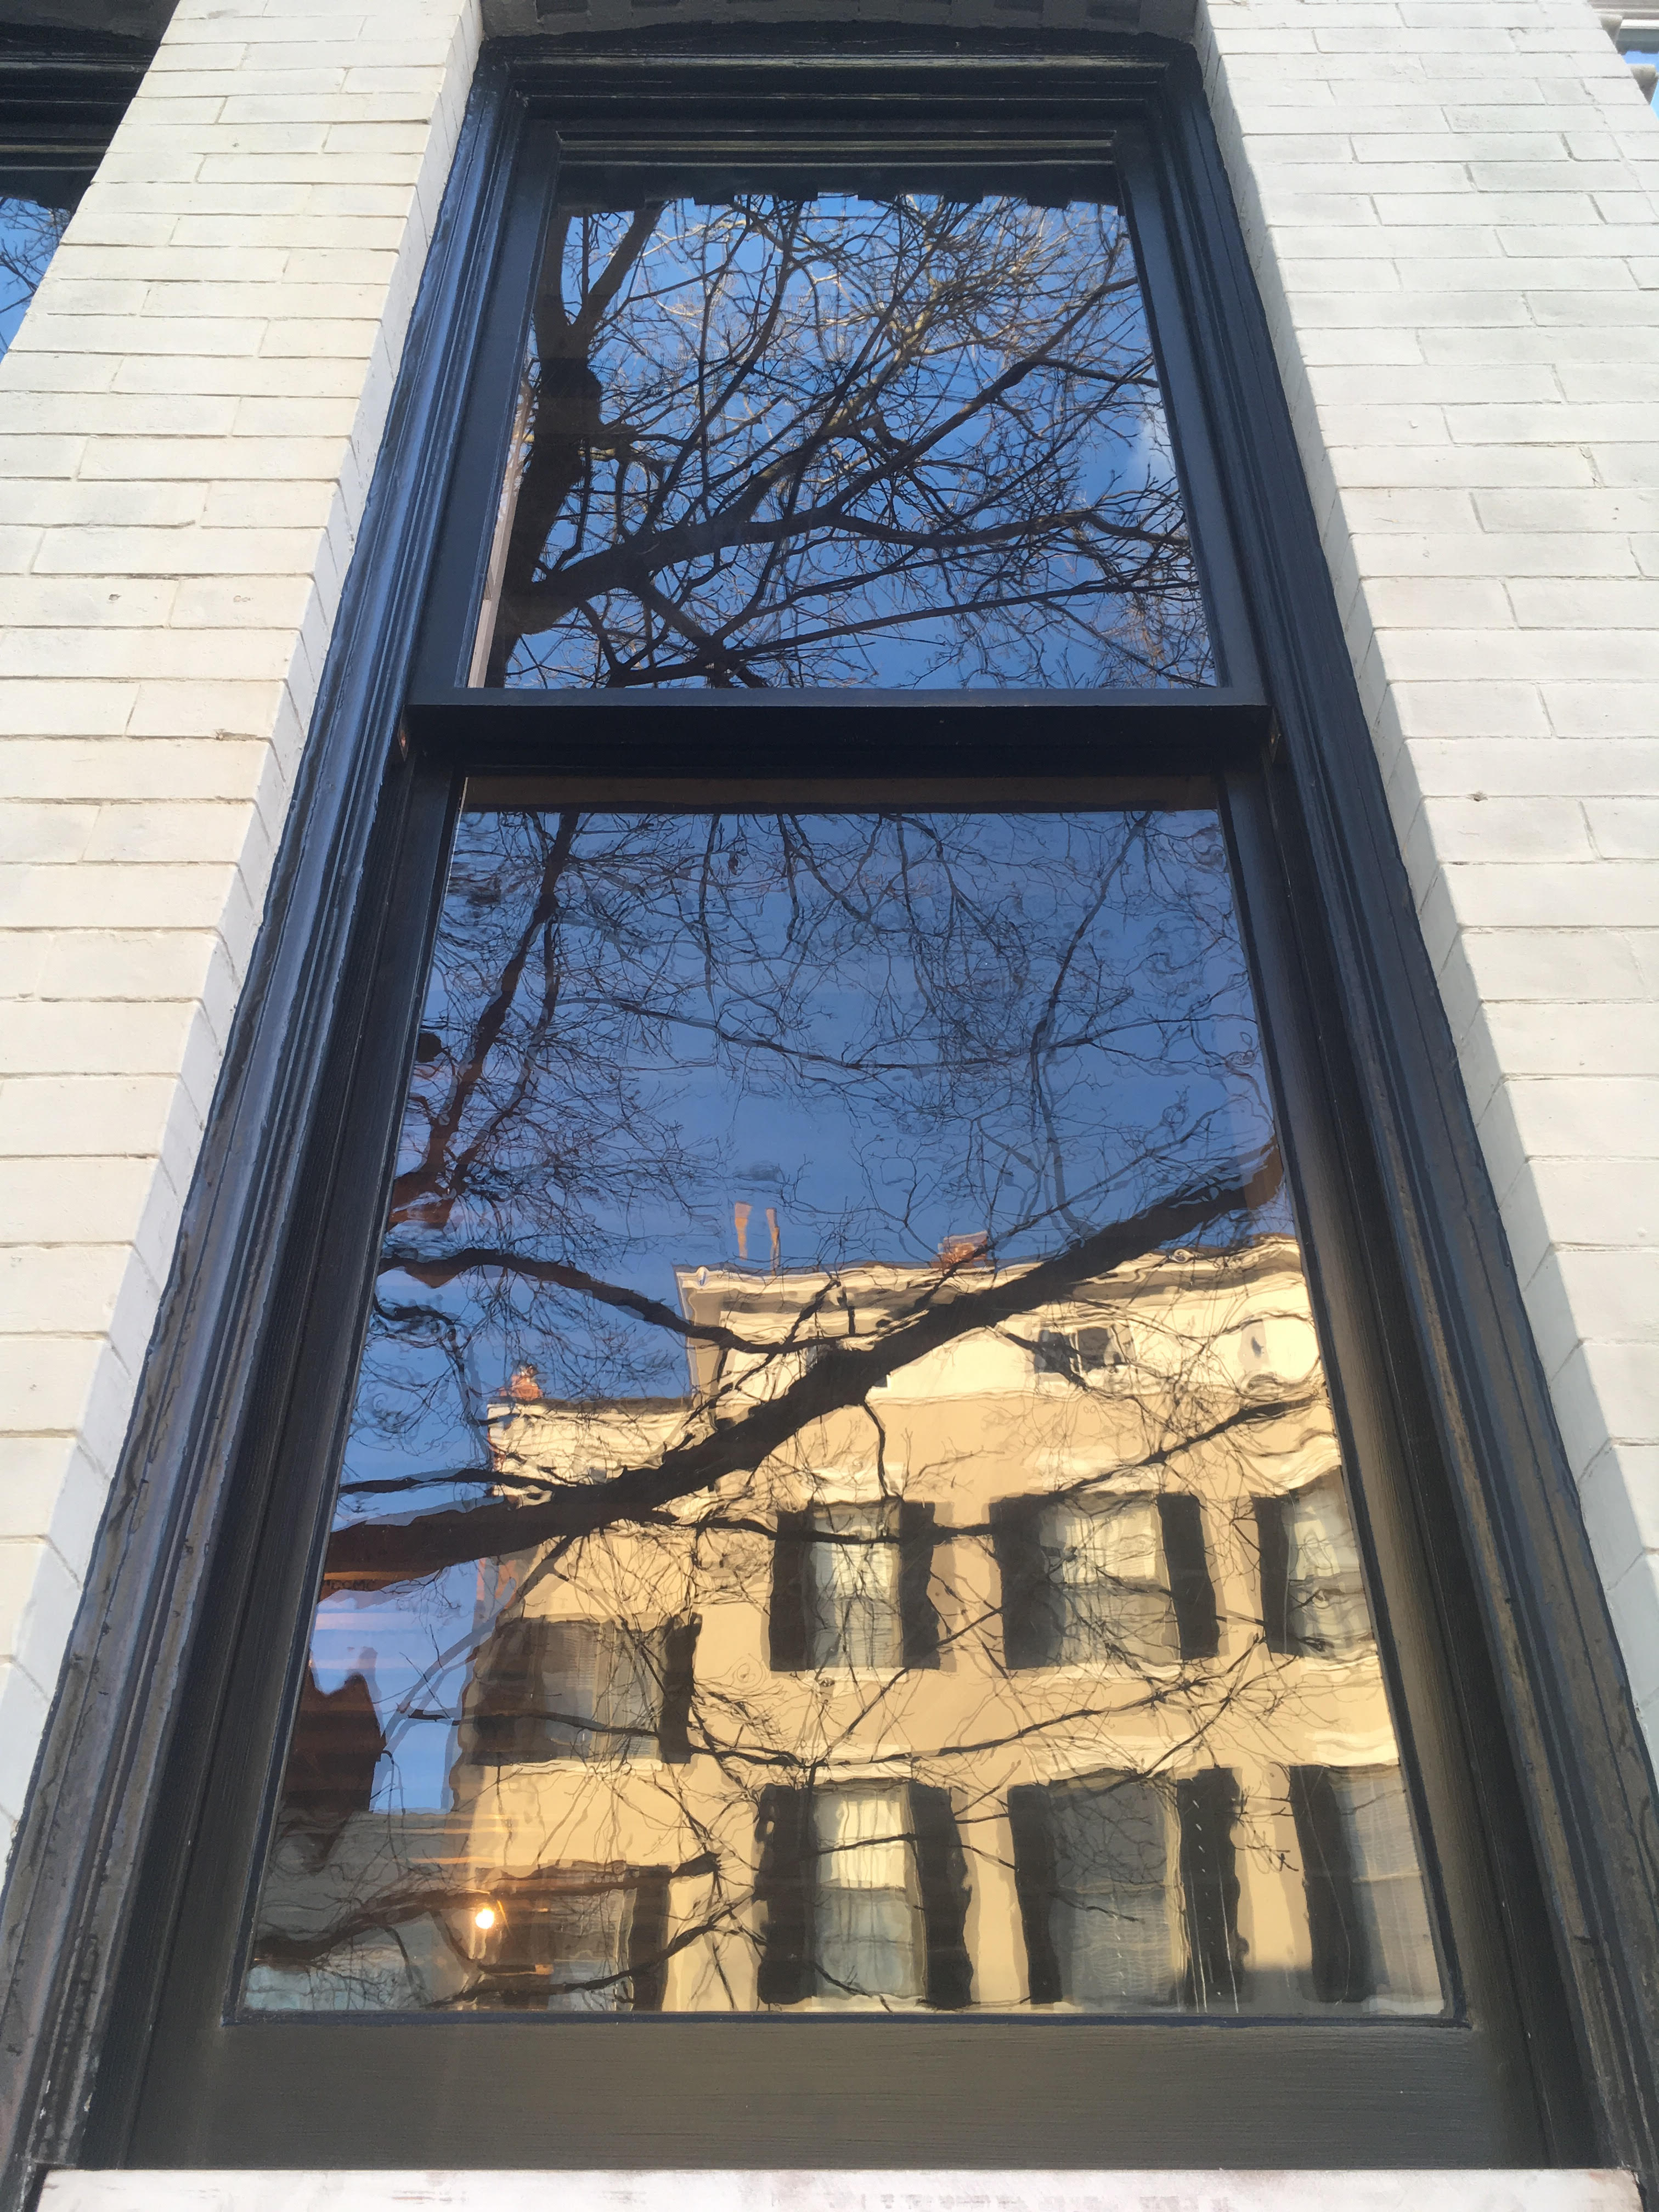 Original Glass Remains at N St. NW